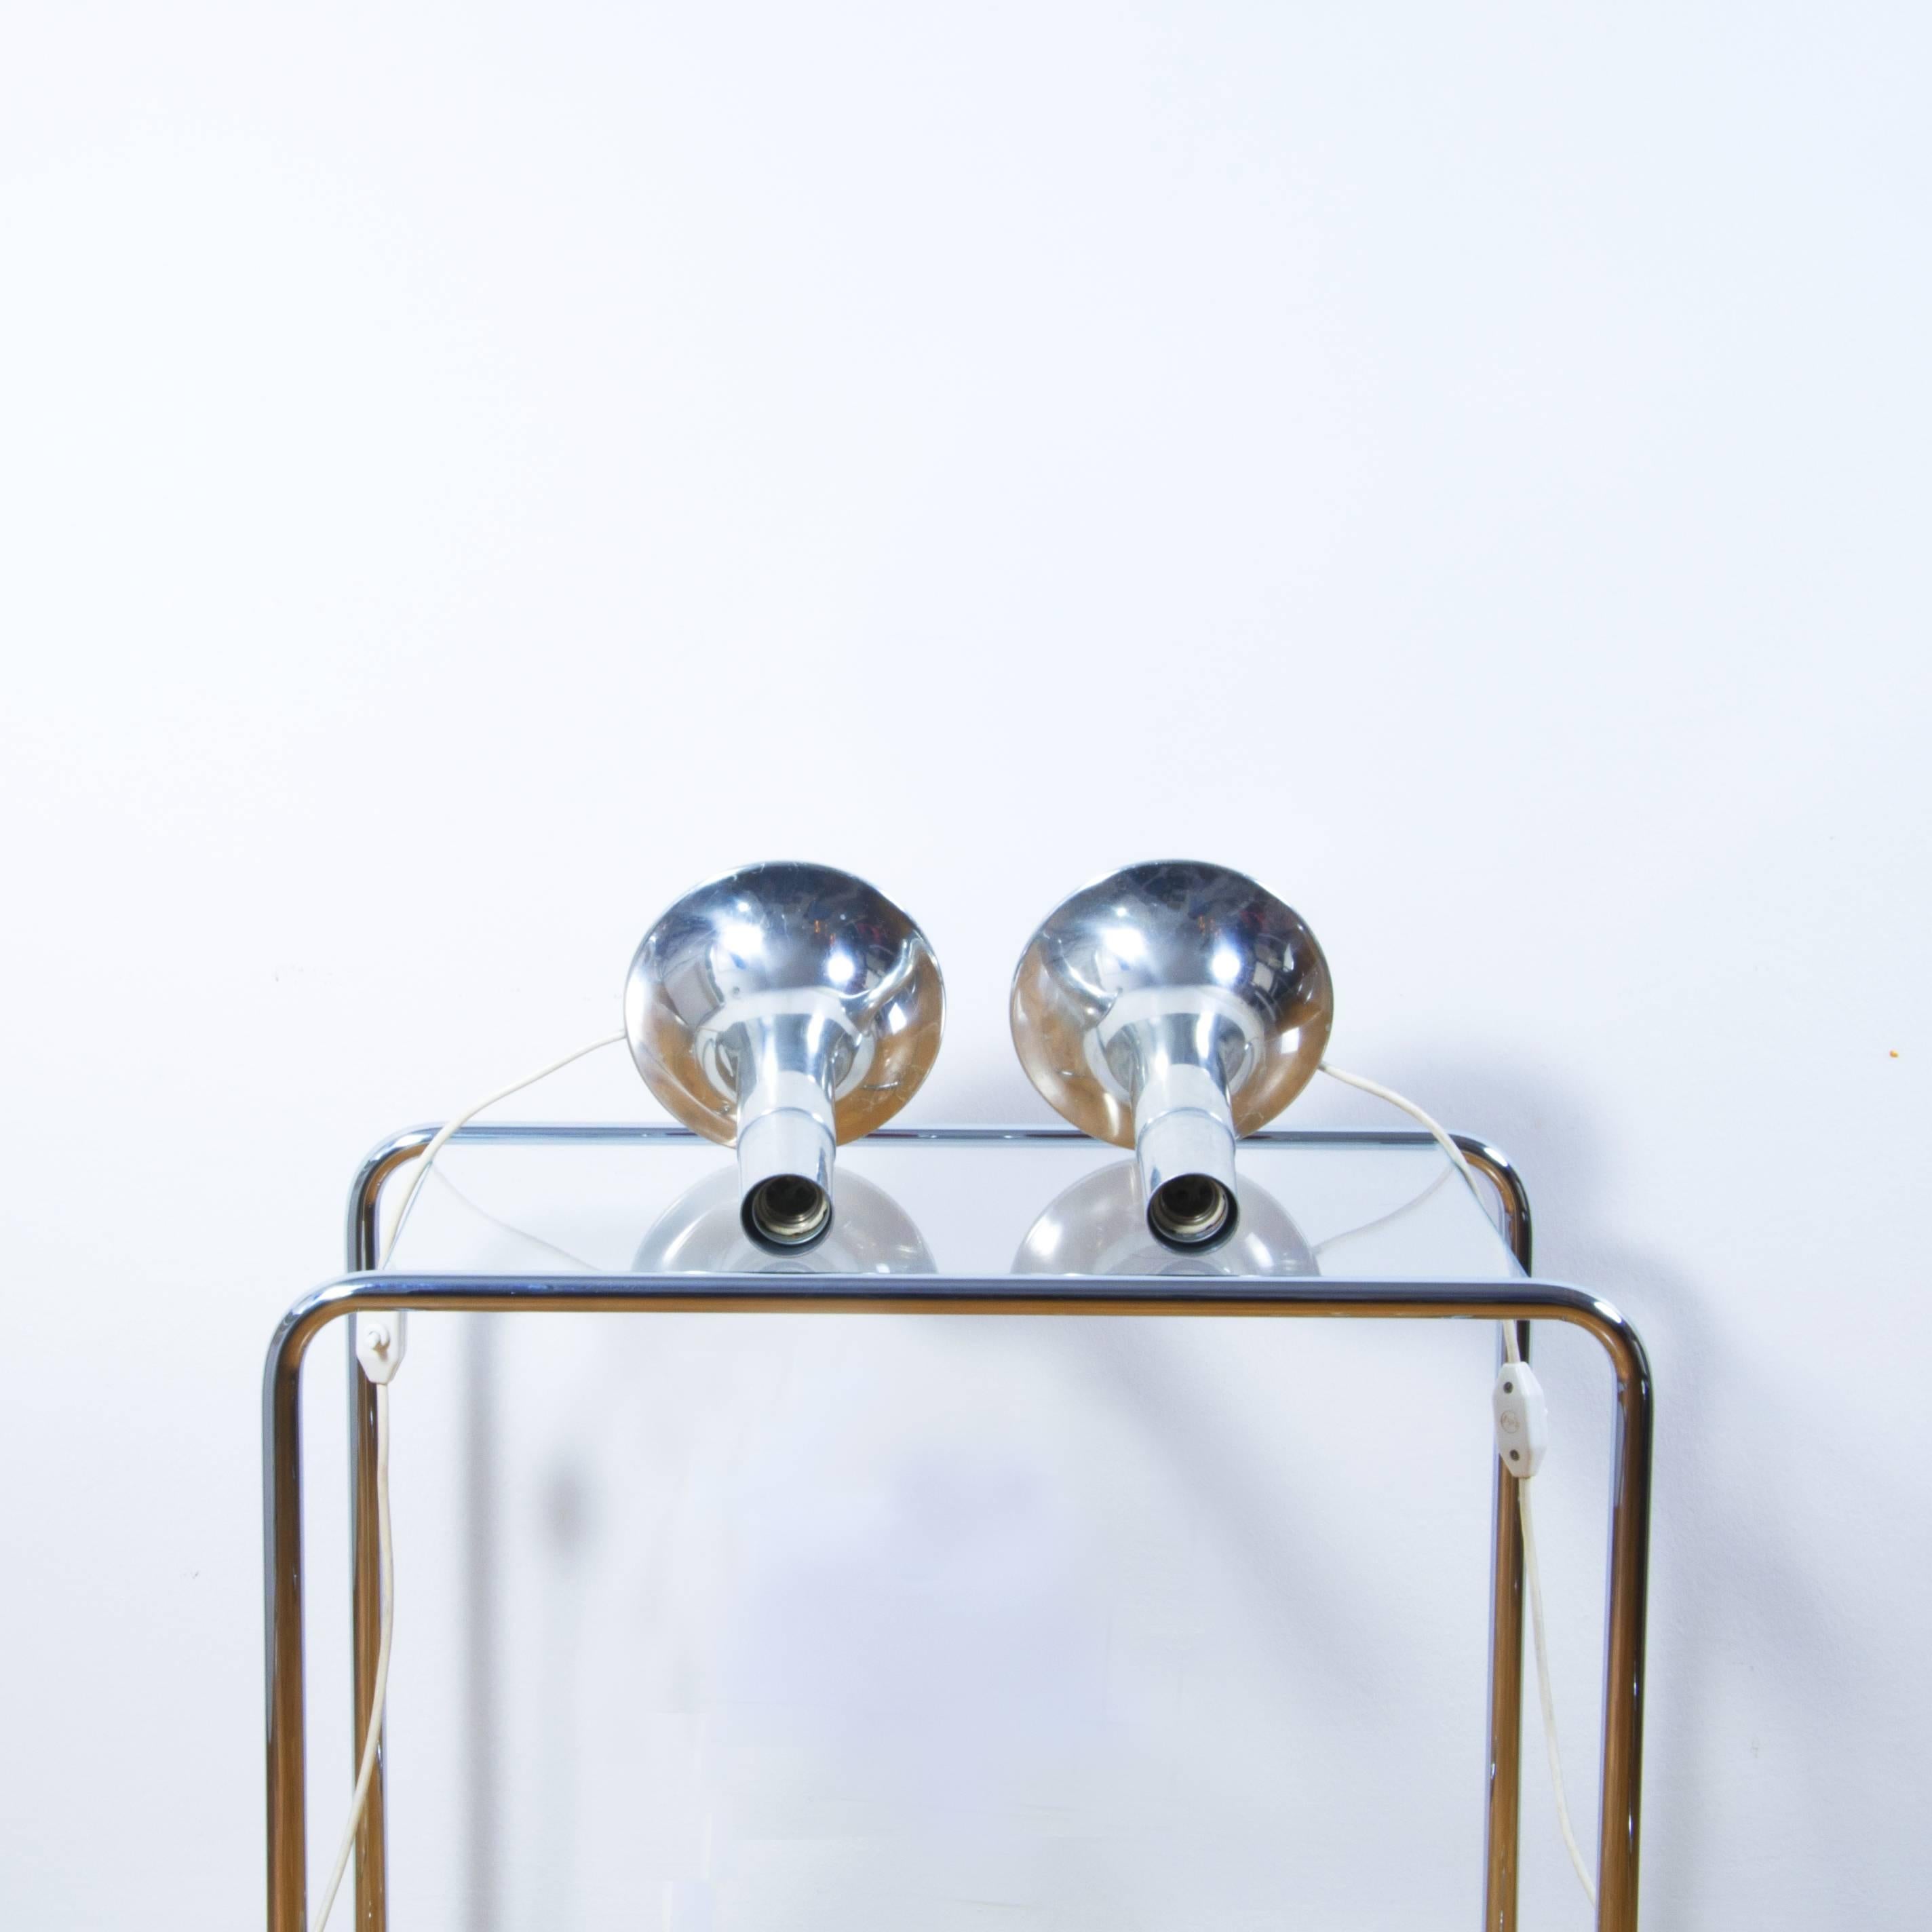 Polished Pair of Aluminium Lamps, 1970s For Sale